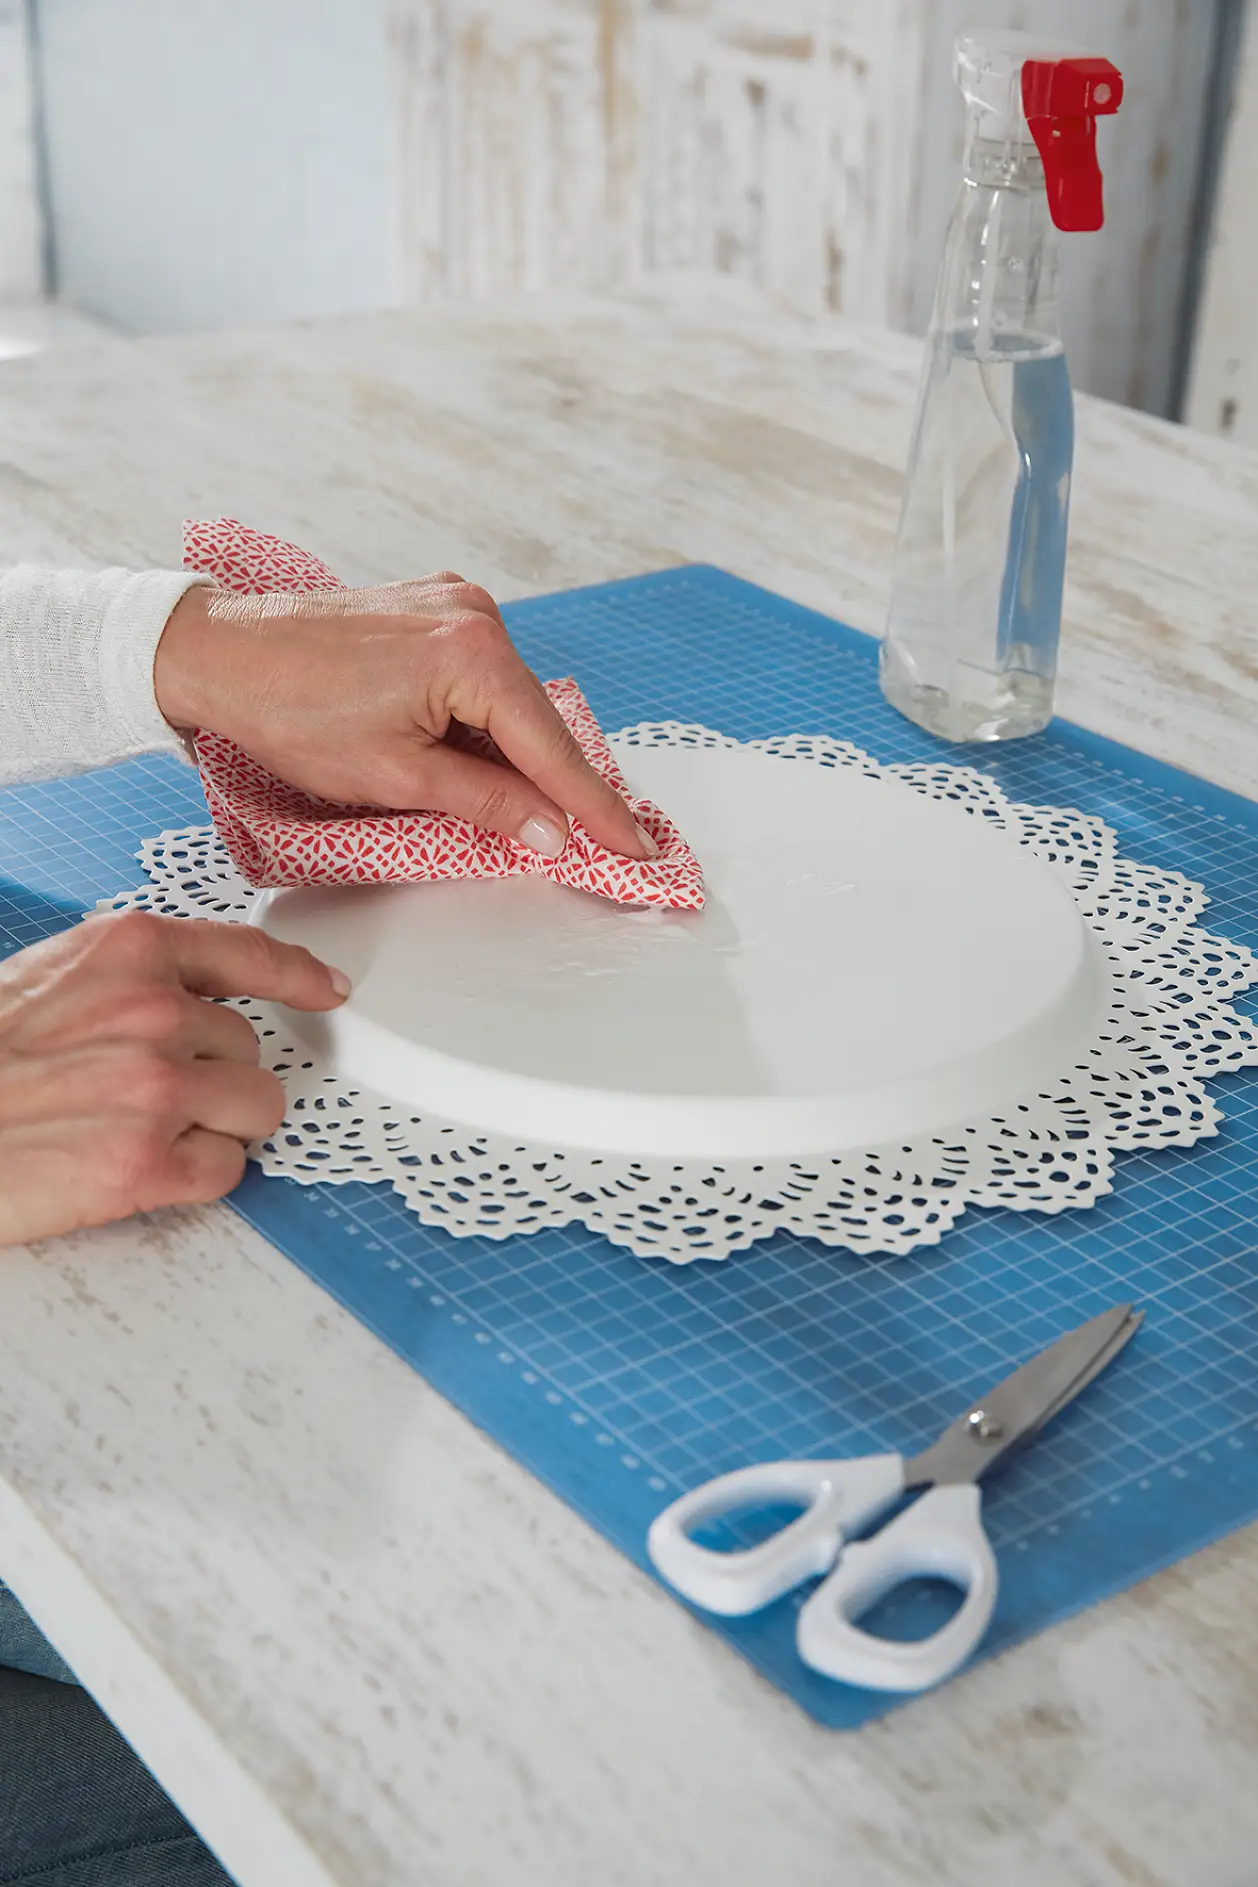 Clean the candle holder and plate thoroughly with alcohol- or silicone-free glass cleaner.